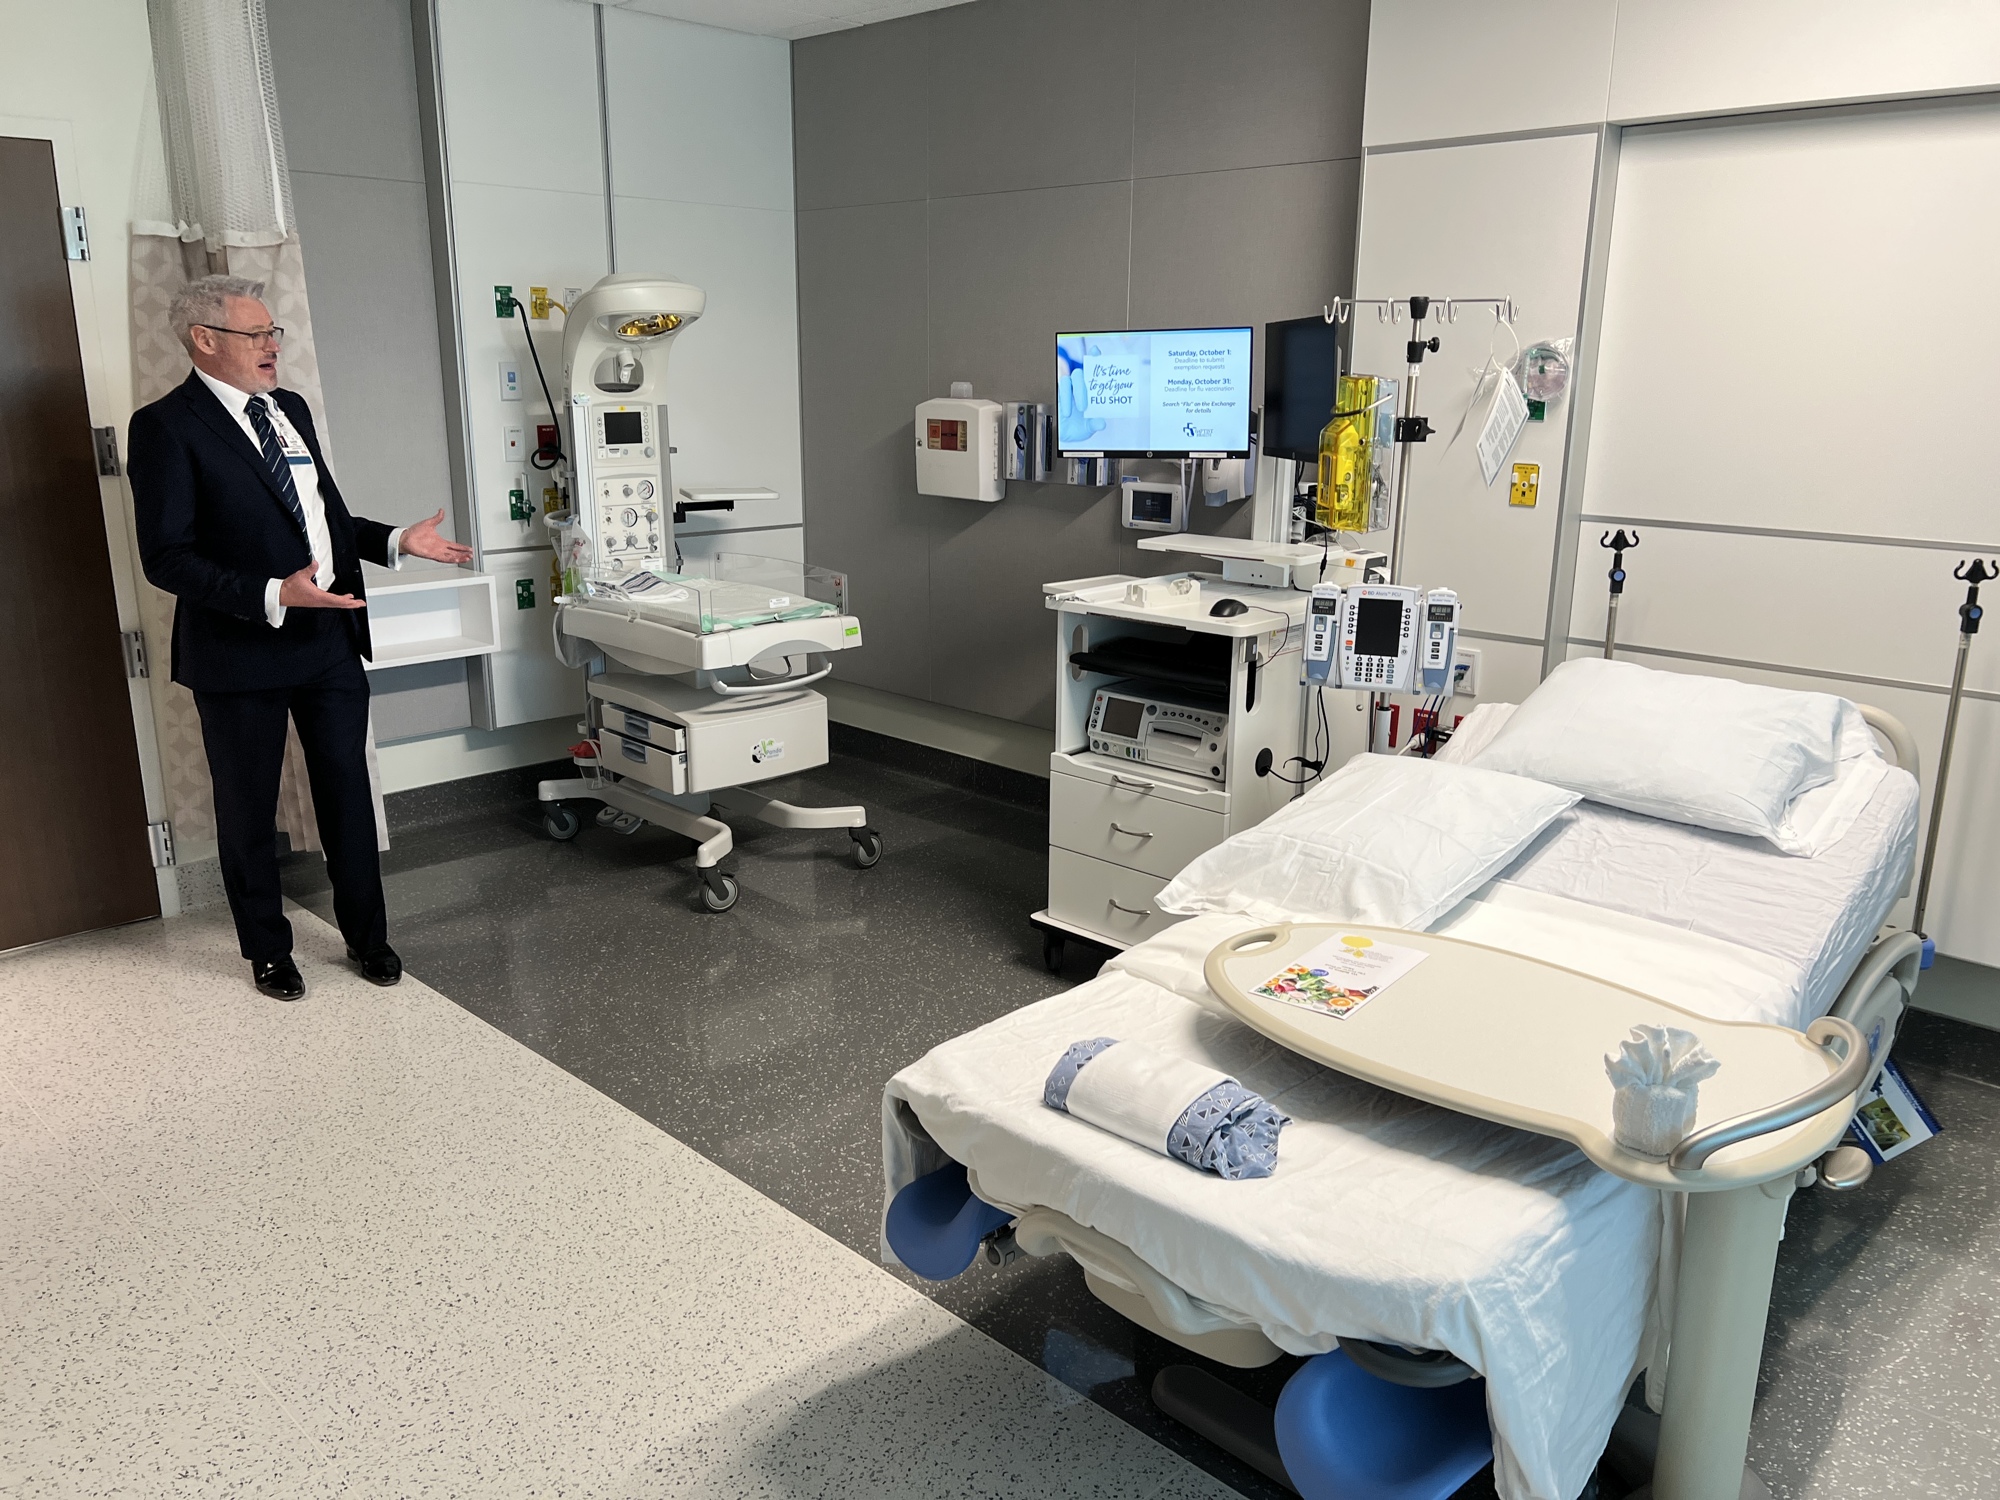 Hospital President Darin Roark shows one of the 20 maternity suites at Baptist Medical Center Clay. The rooms have the delivery equipment in designated storage areas.